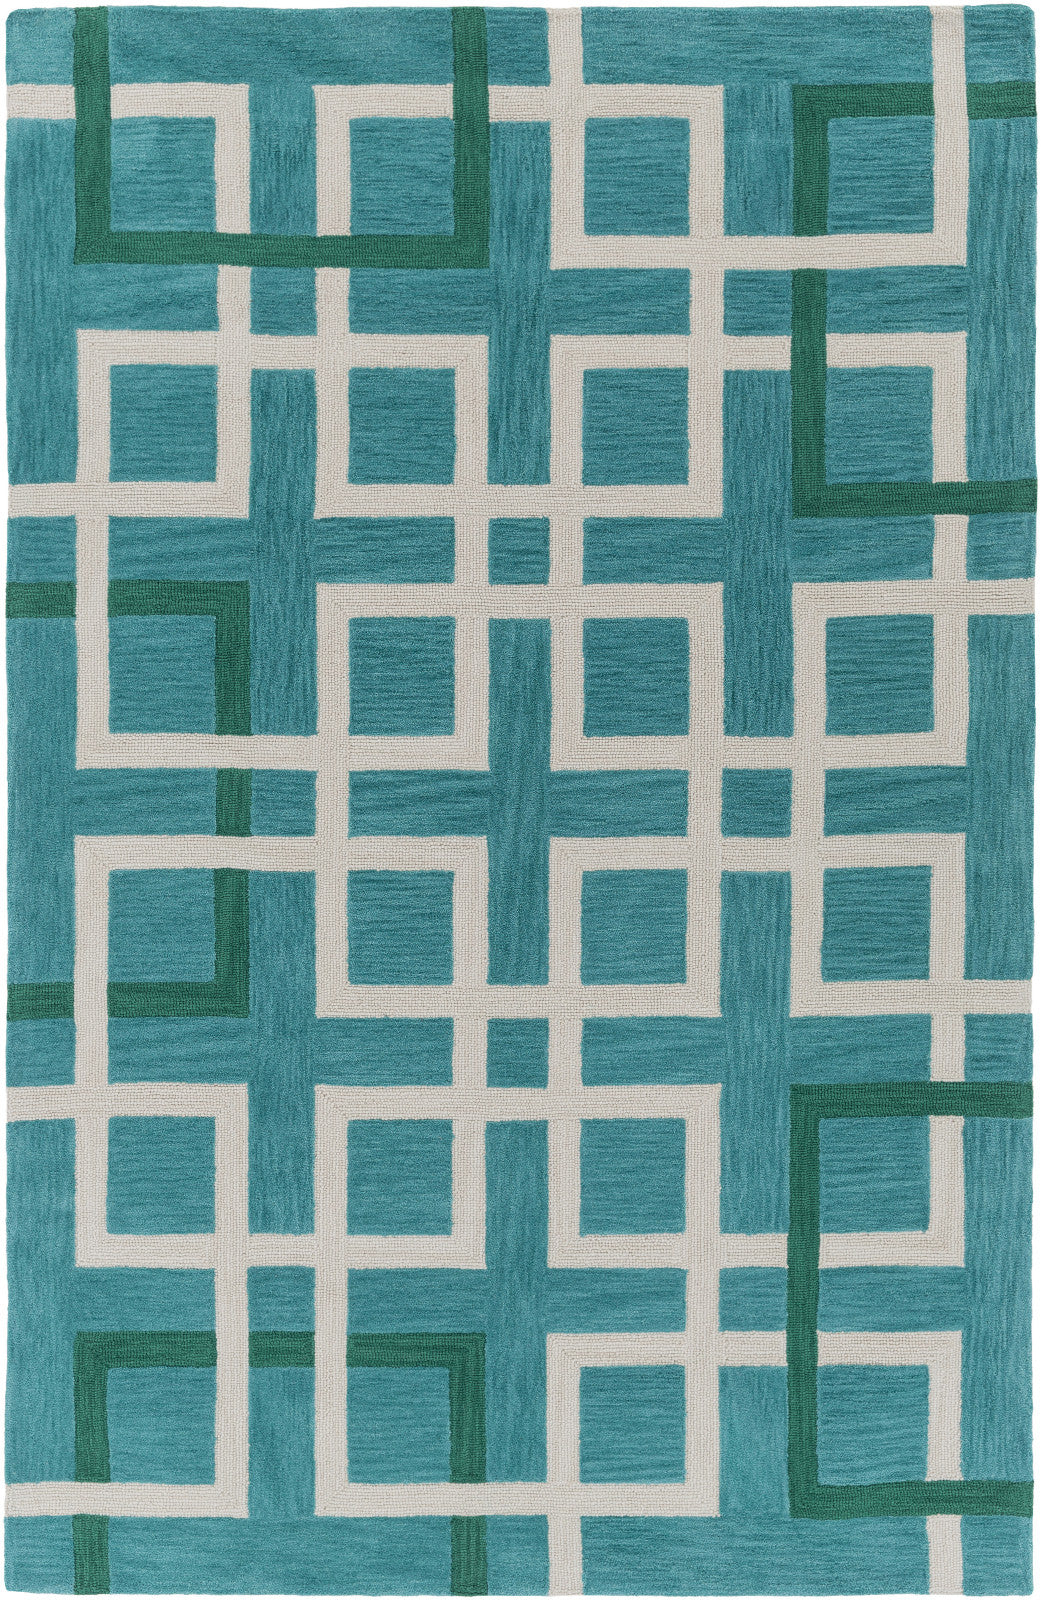 Artistic Weavers Holden Mila Turquoise/Kelly Green Area Rug main image